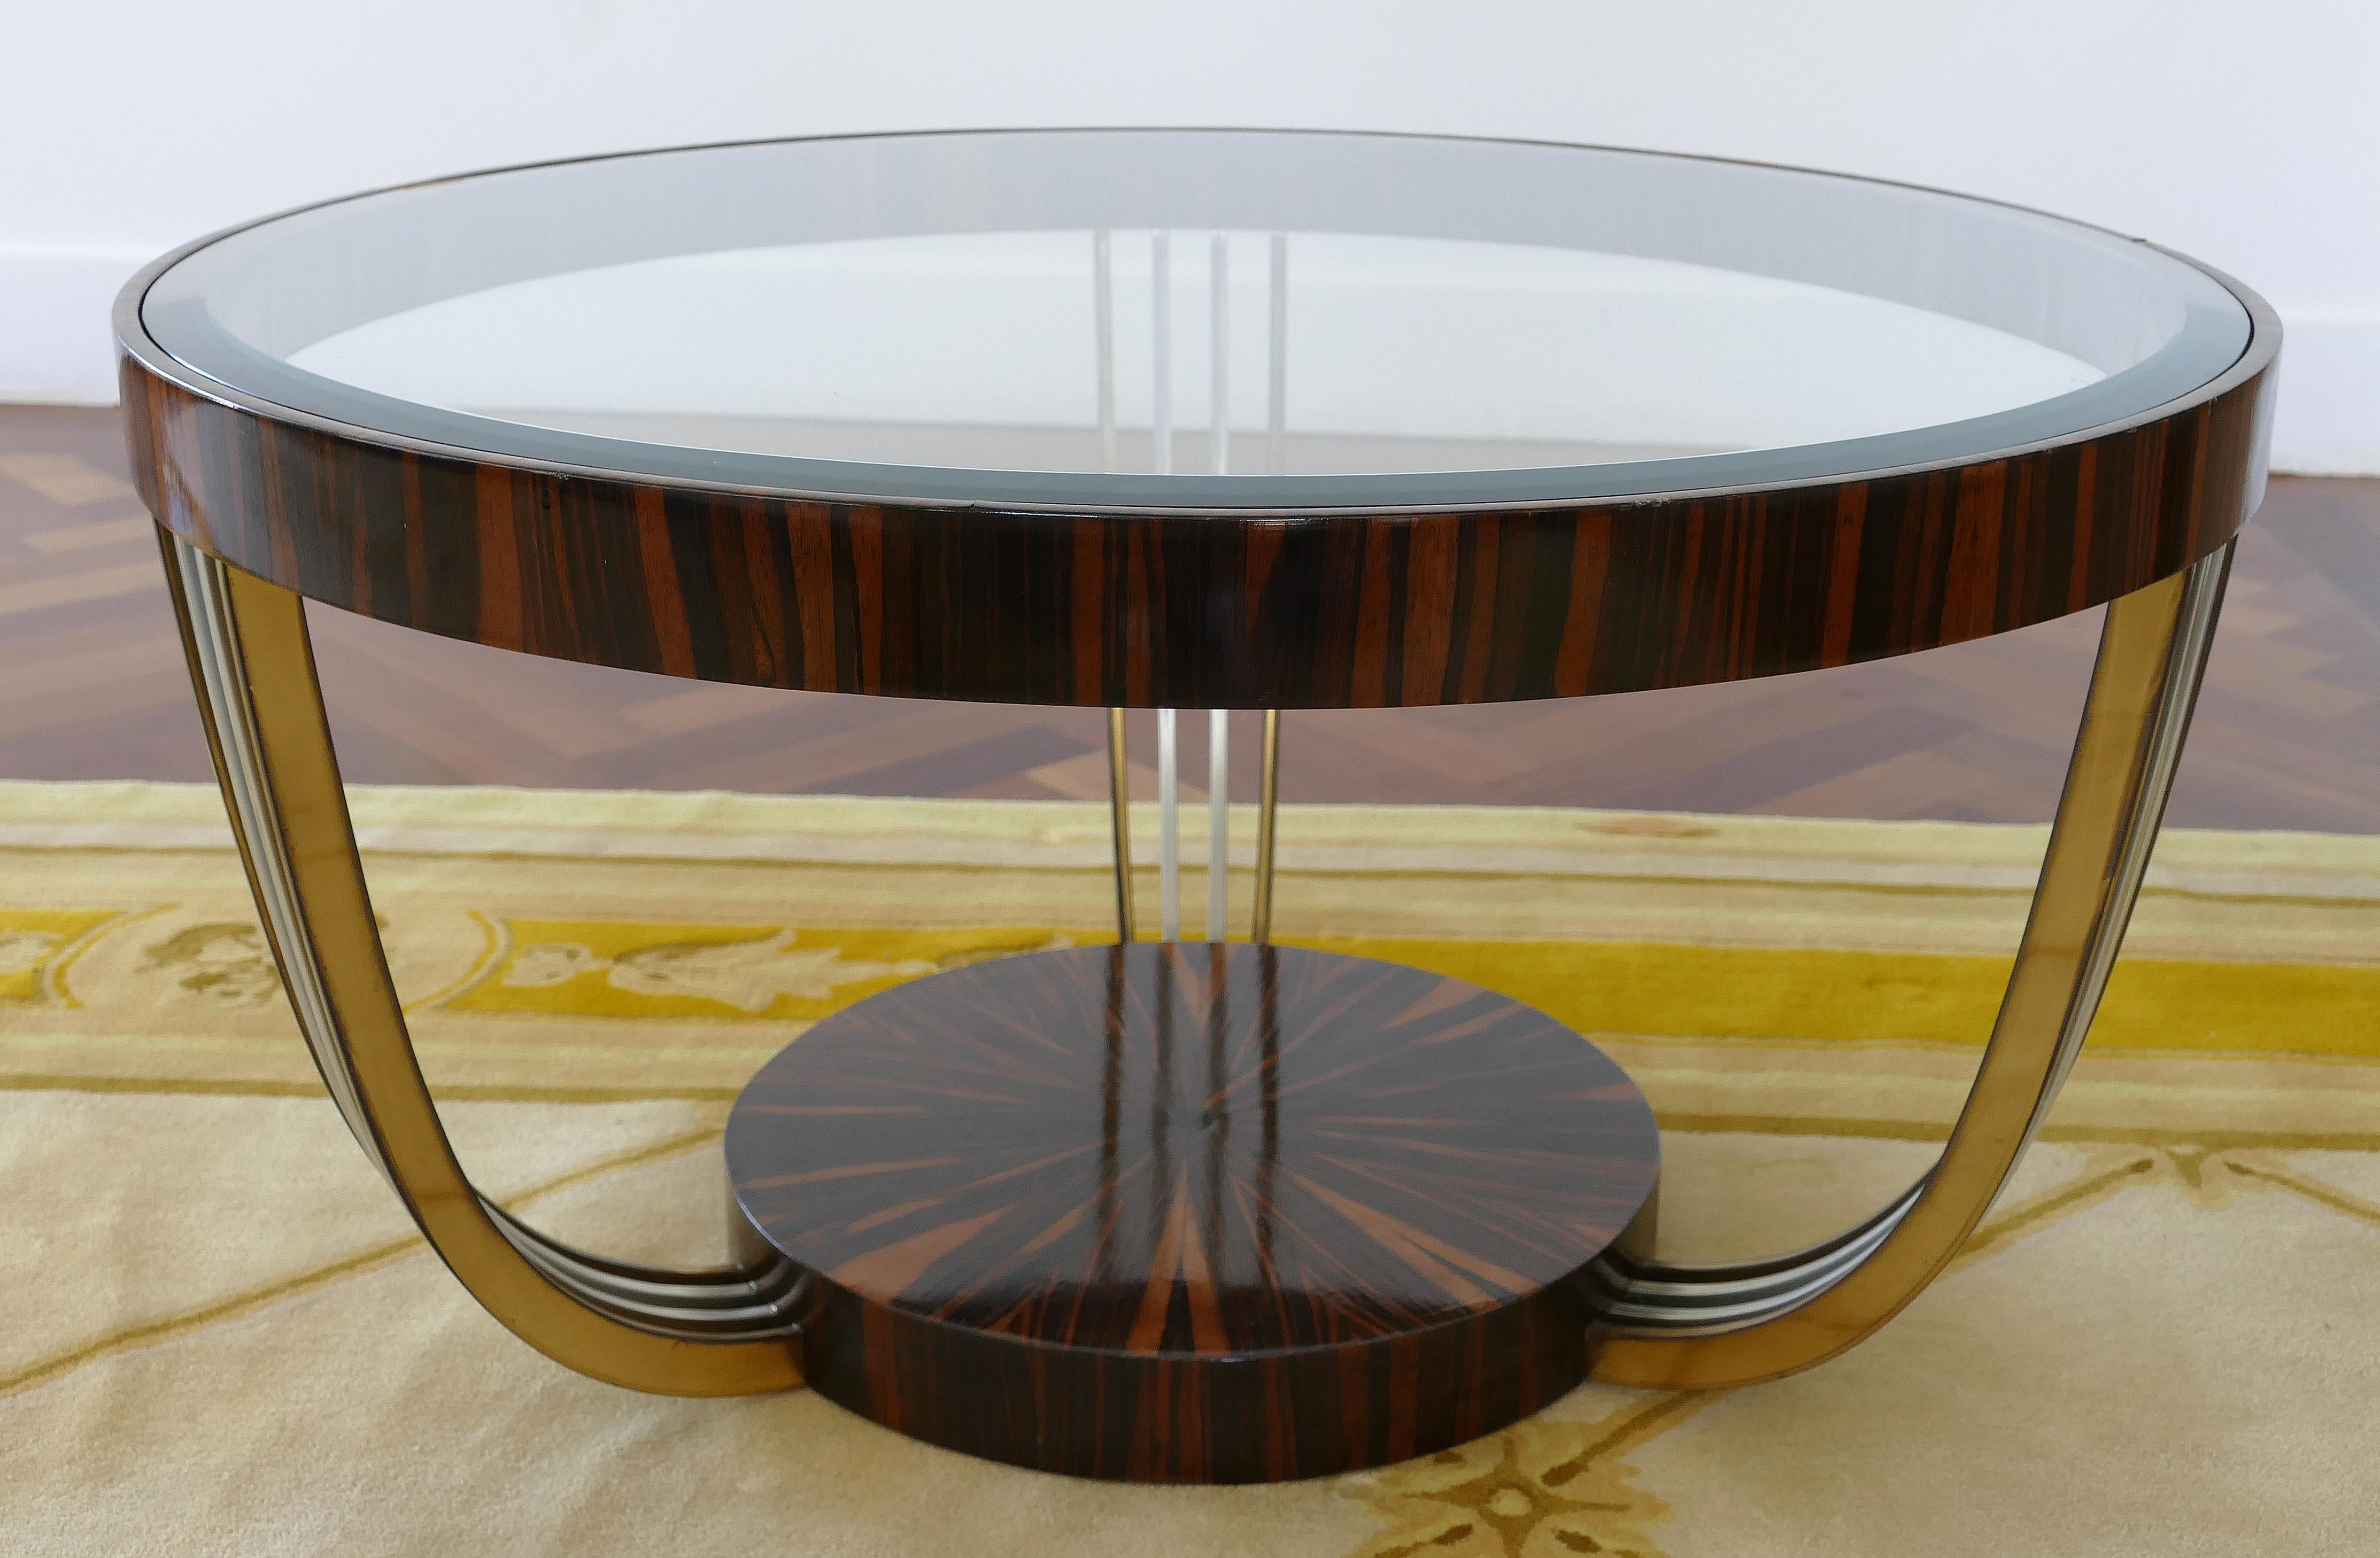 Art Deco Macassar brass and chrome coffee table with an inset beveled glass top

Offered for sale is a round period Art Deco Macassar wood coffee table with brass and chrome accents. The table has an inset beveled glass top. The round base has a